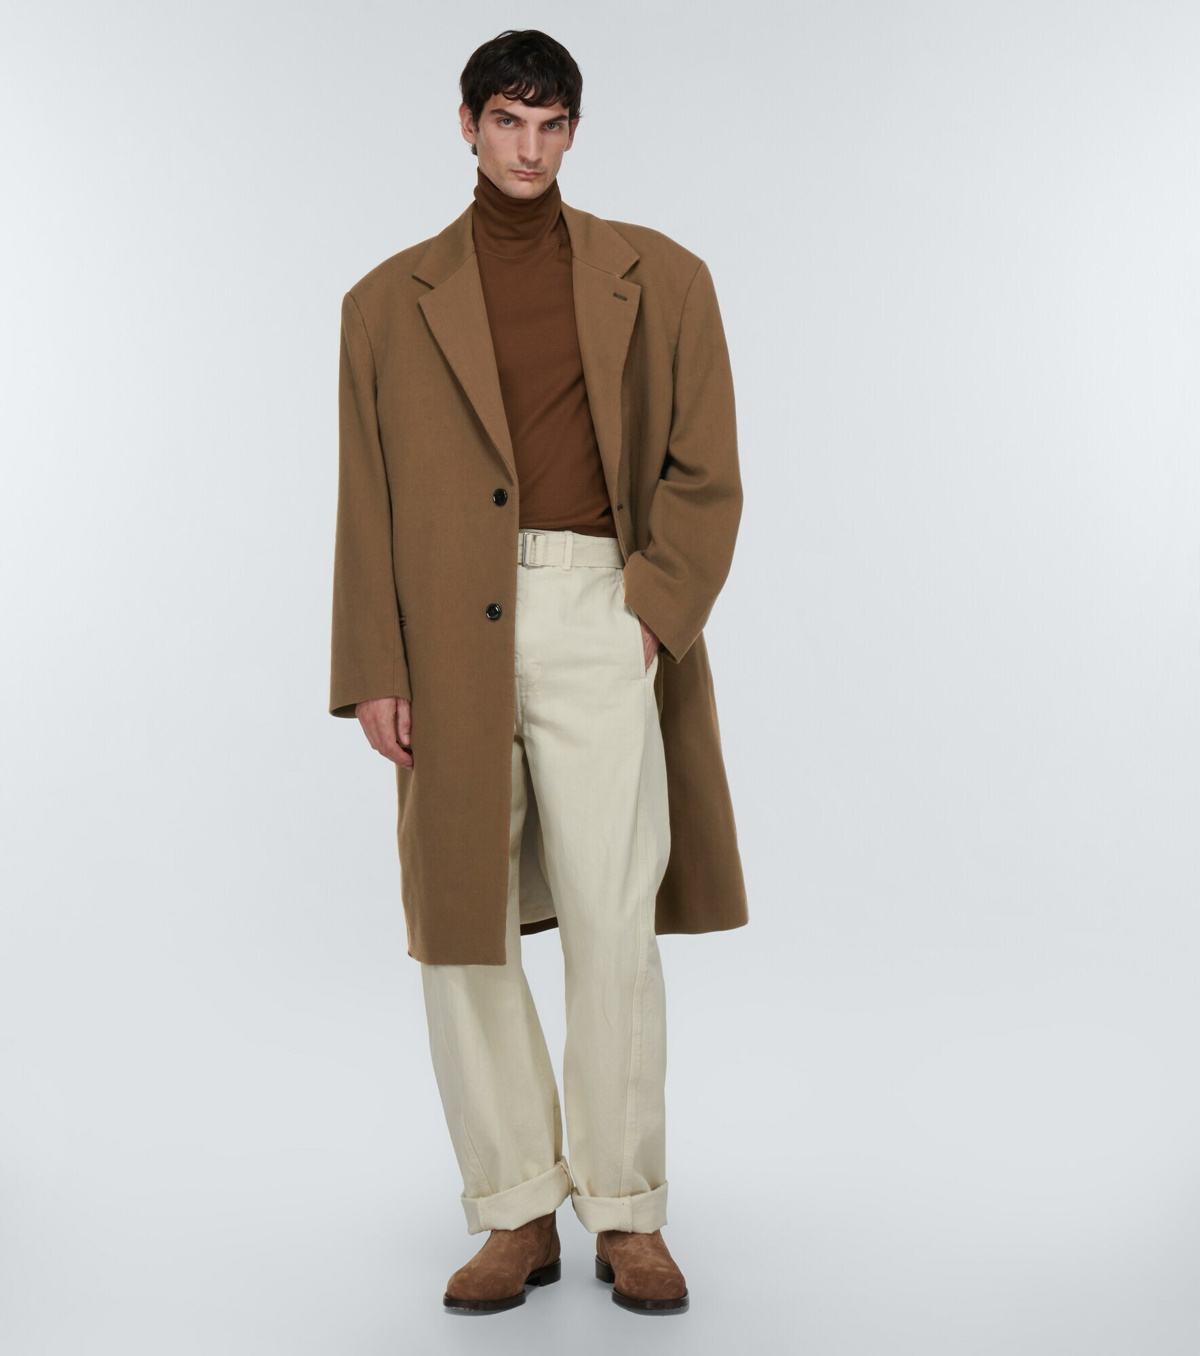 Lemaire - Chesterfield coat Lemaire